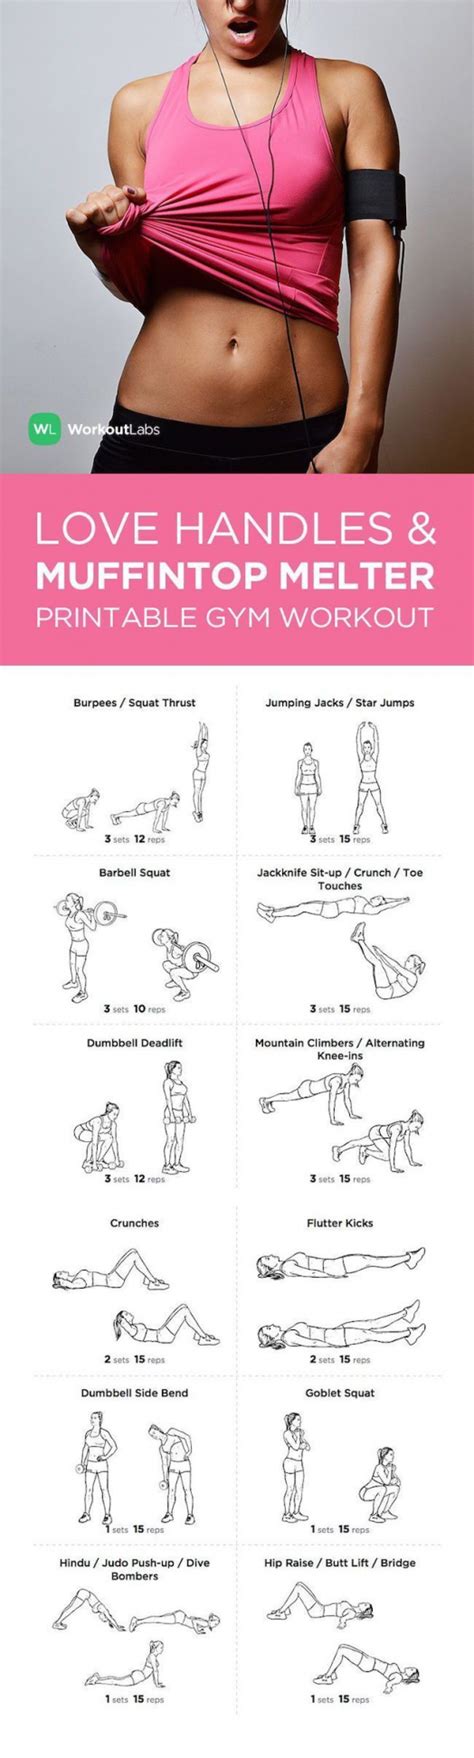 The 11 Best Muffin Top Exercises Dietworkout In 2020 Gym Workouts